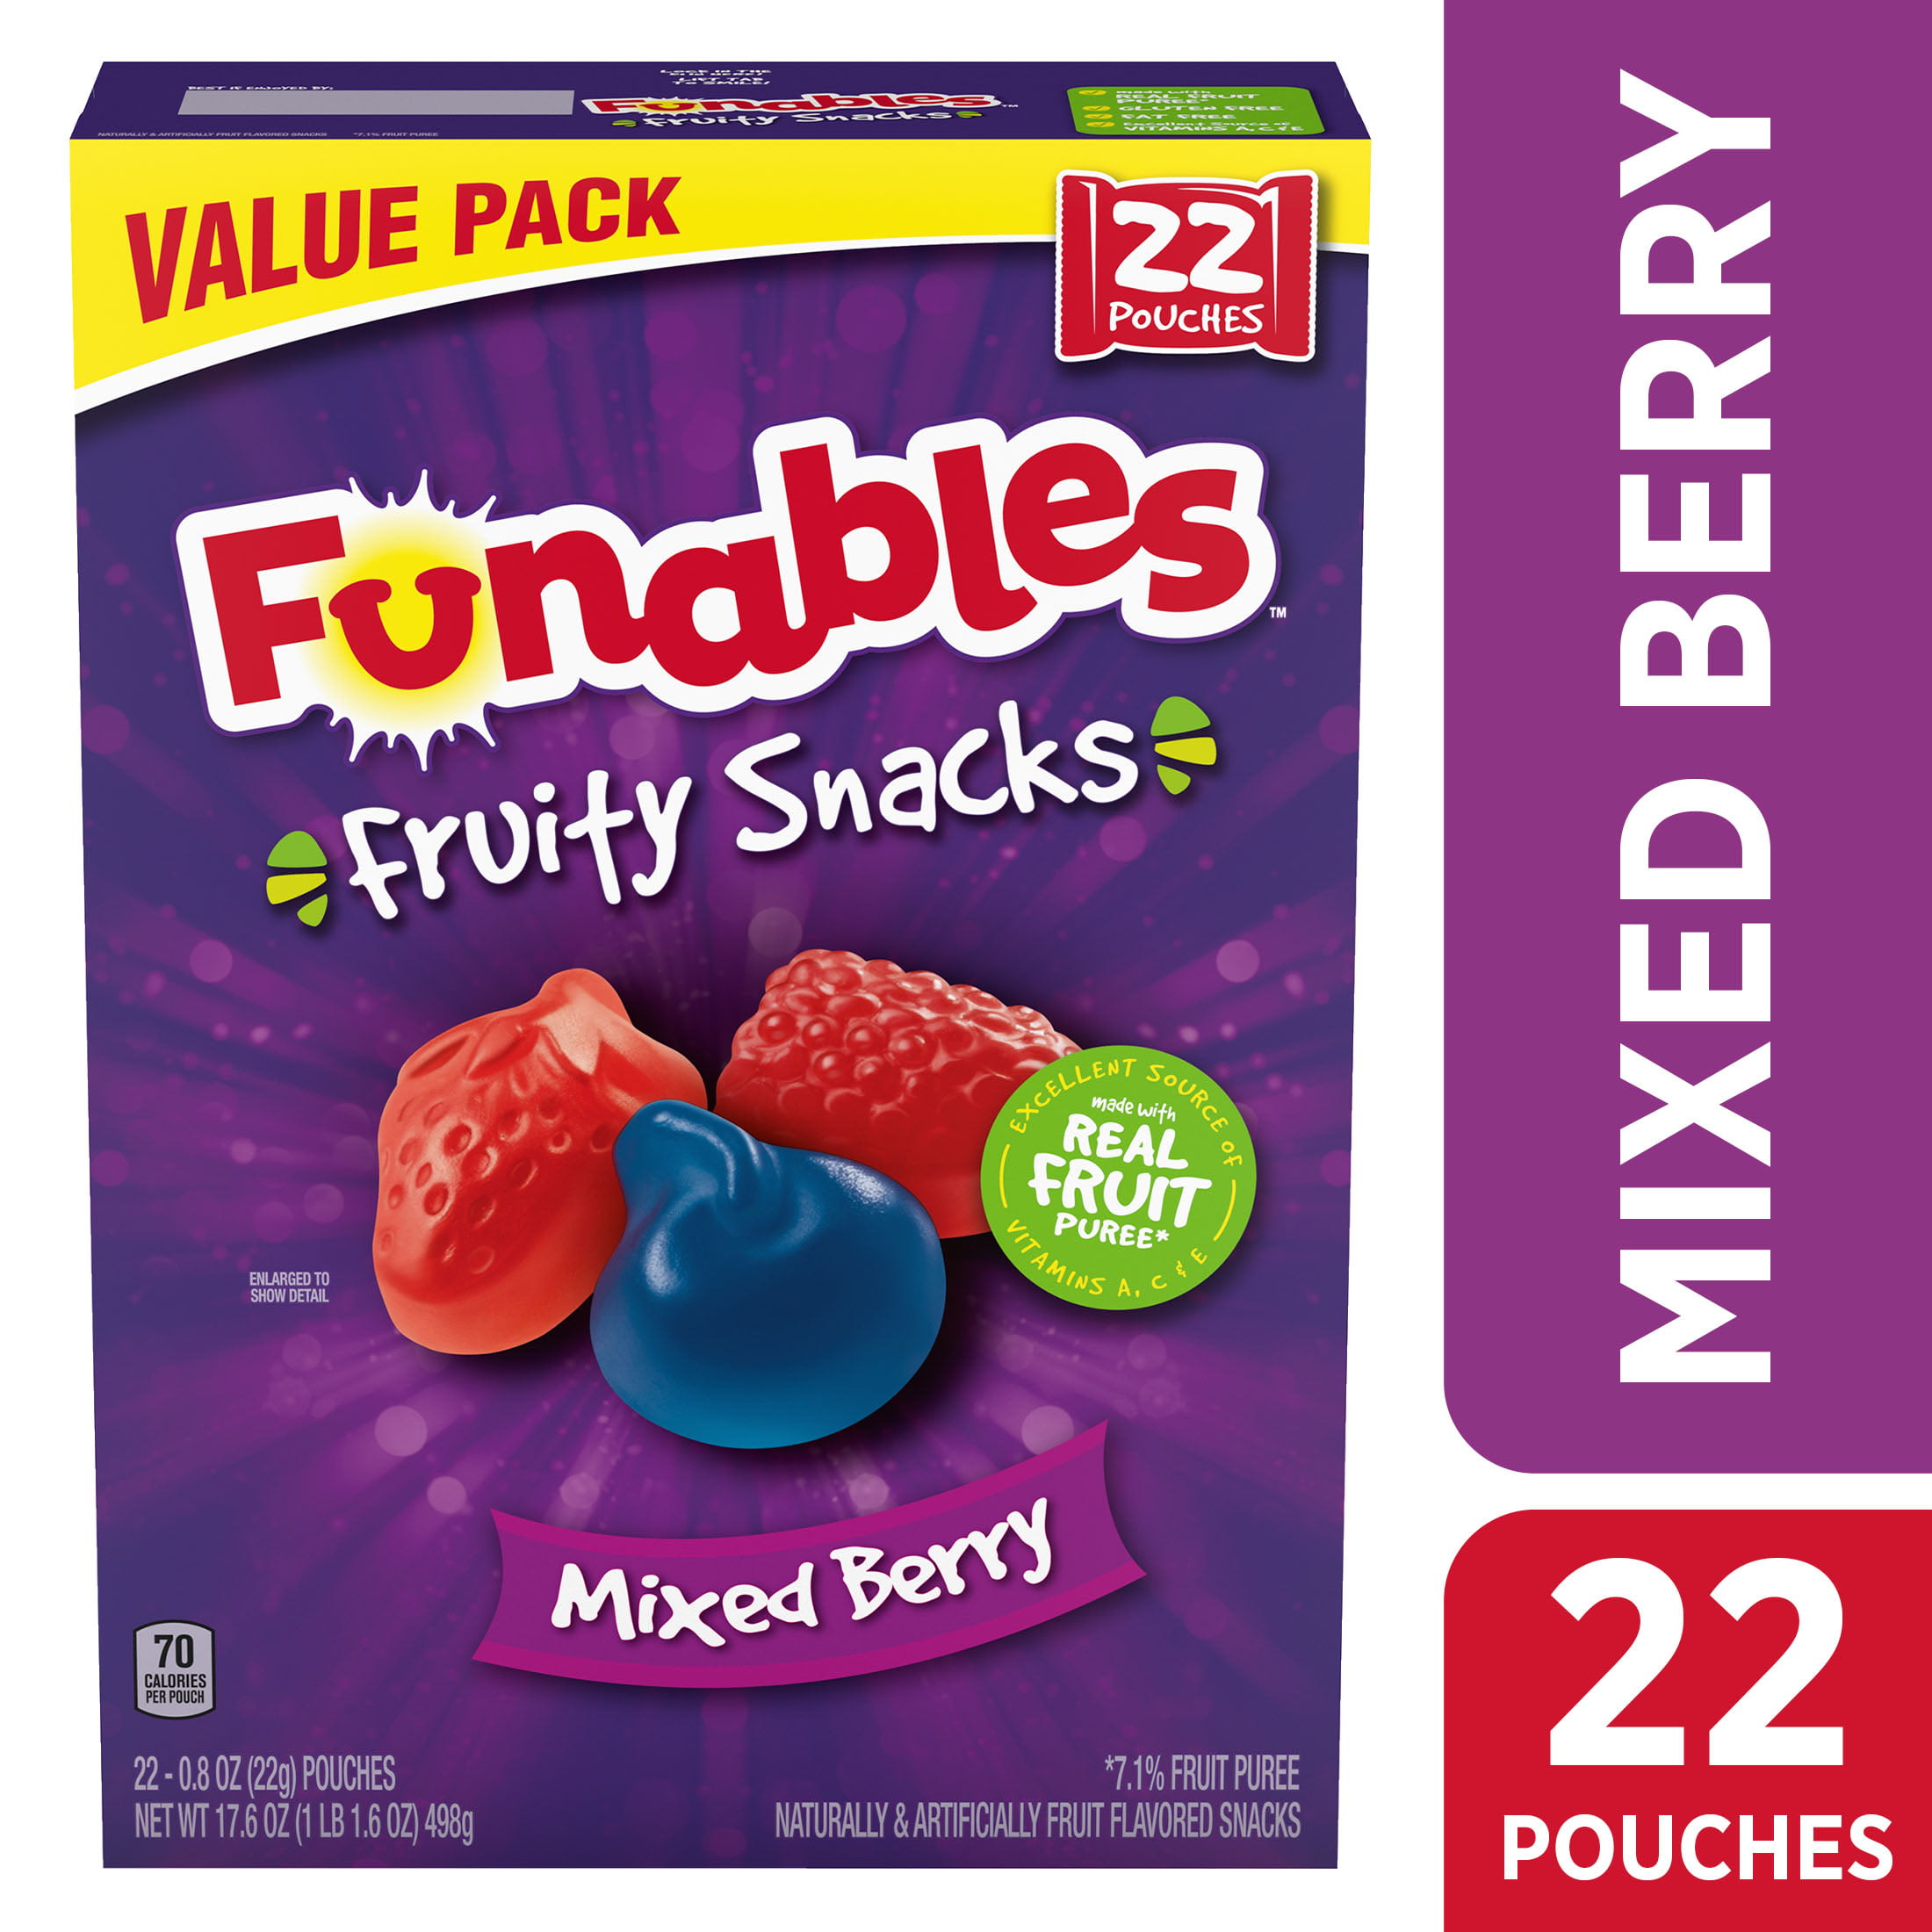 Fruit by the Foot Fruit Flavored Snacks, Berry Tie-Dye, 4.5 oz, 6